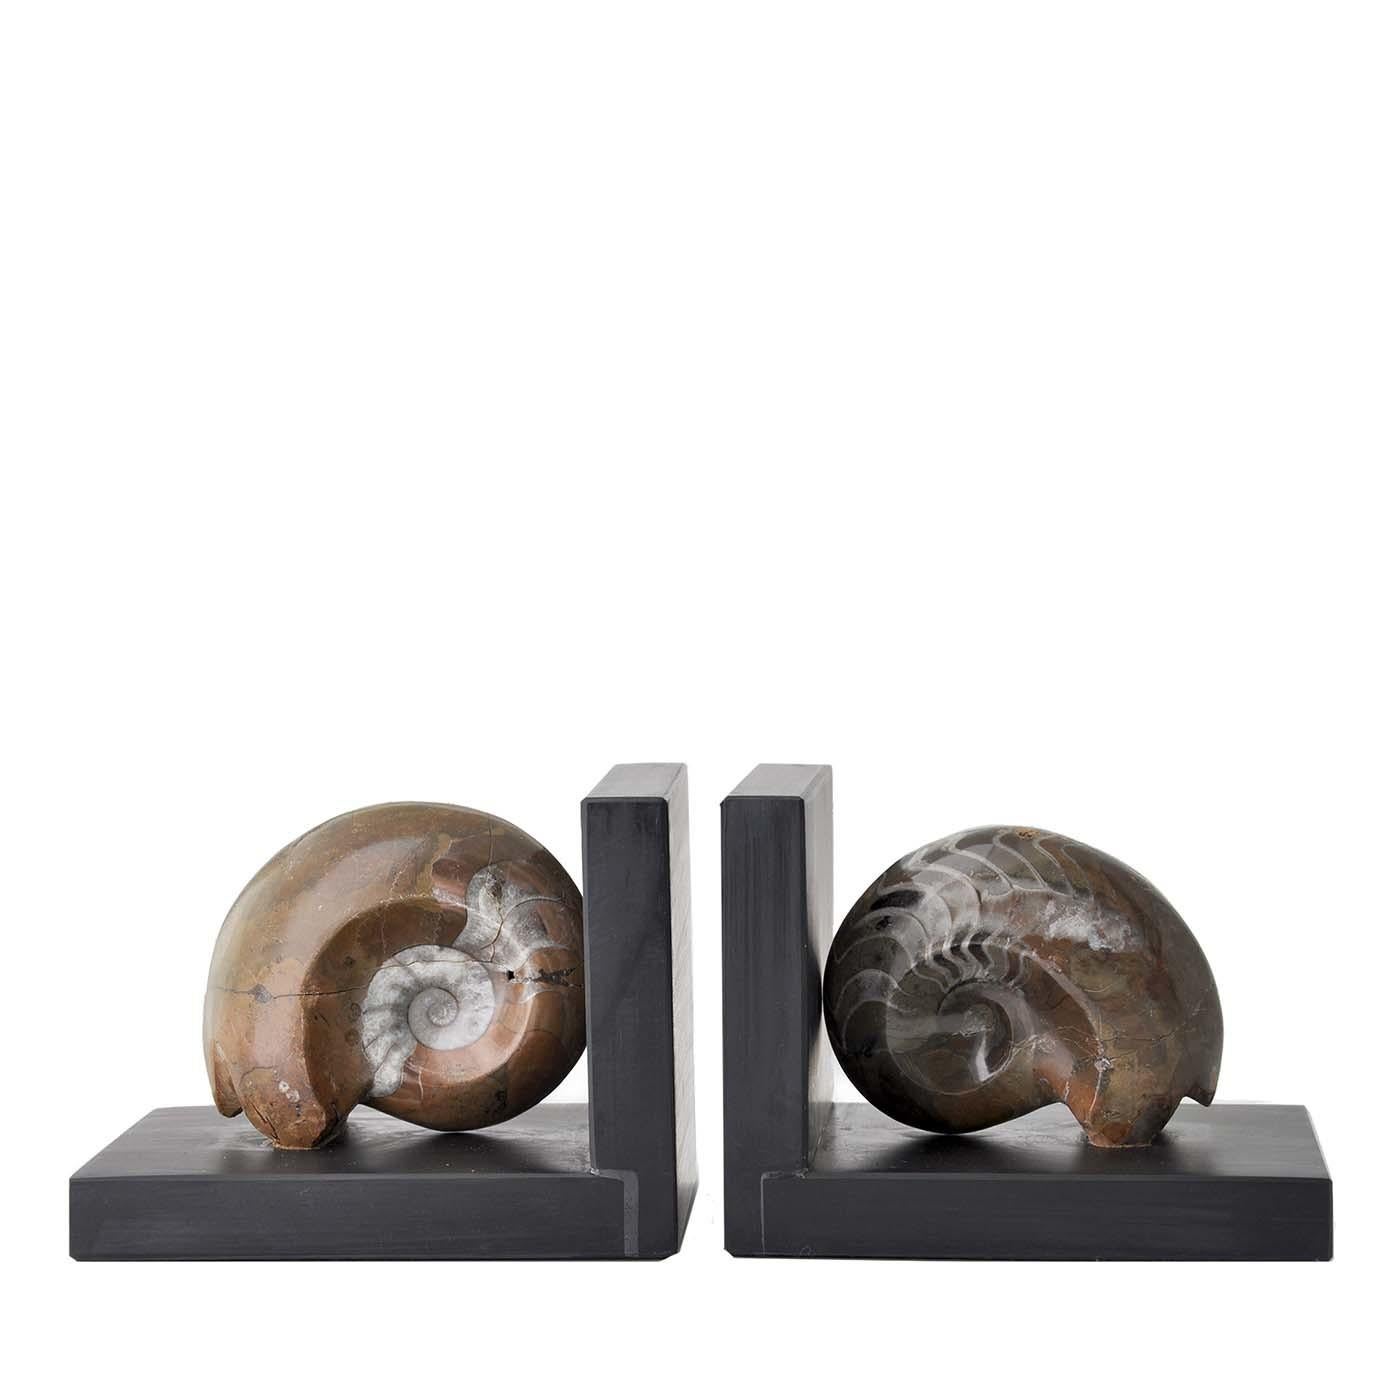 This exclusive Ammonite Booksends sculpture combines contemporary design with authentic fossil shells that date back to milions of years ago. It is truly unique because the natural form and the decorative colors of each Ammonite fossil shell are